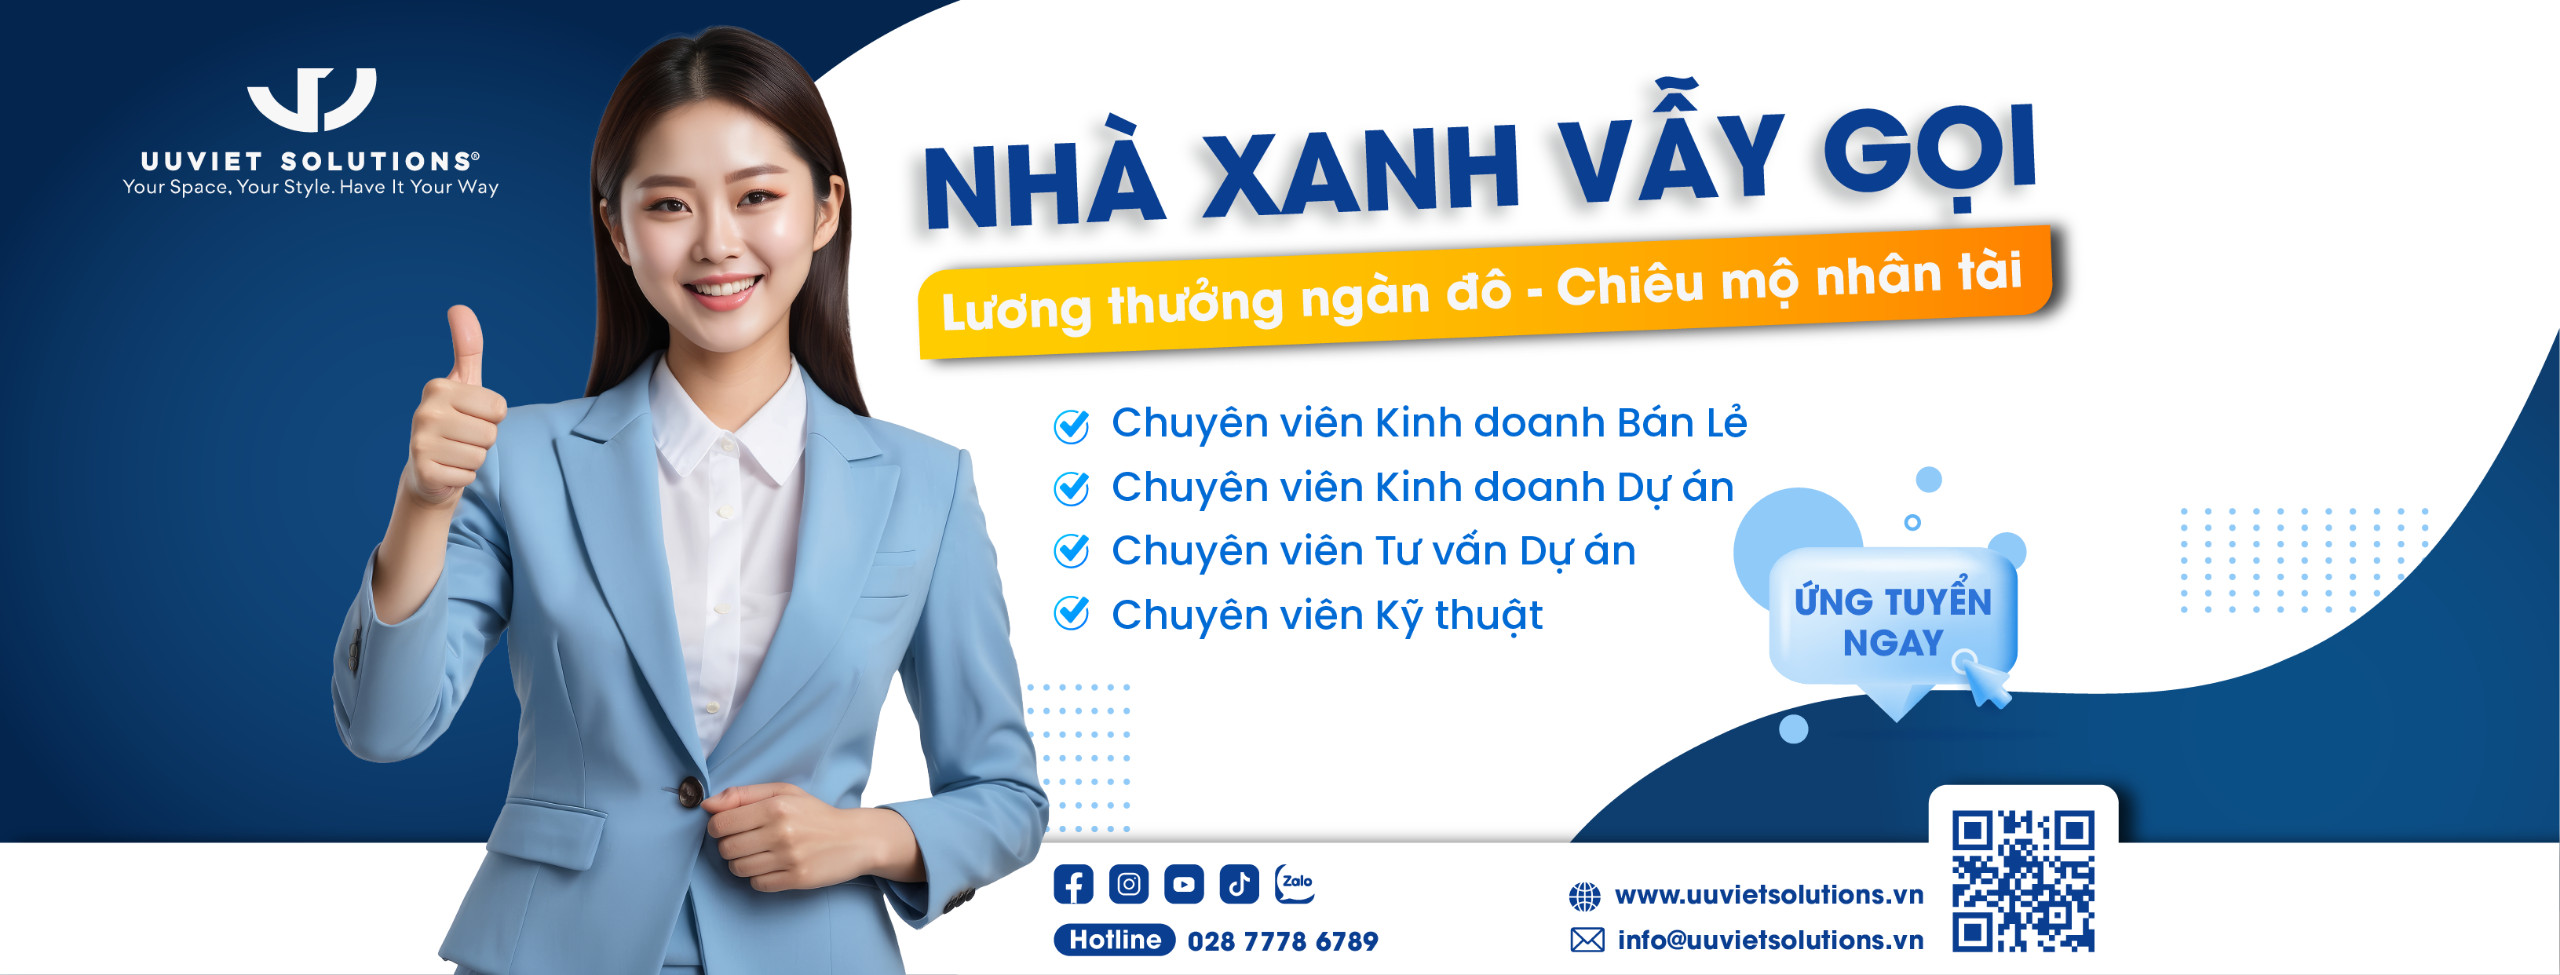 Tuyển dụng Uuviet Solutions